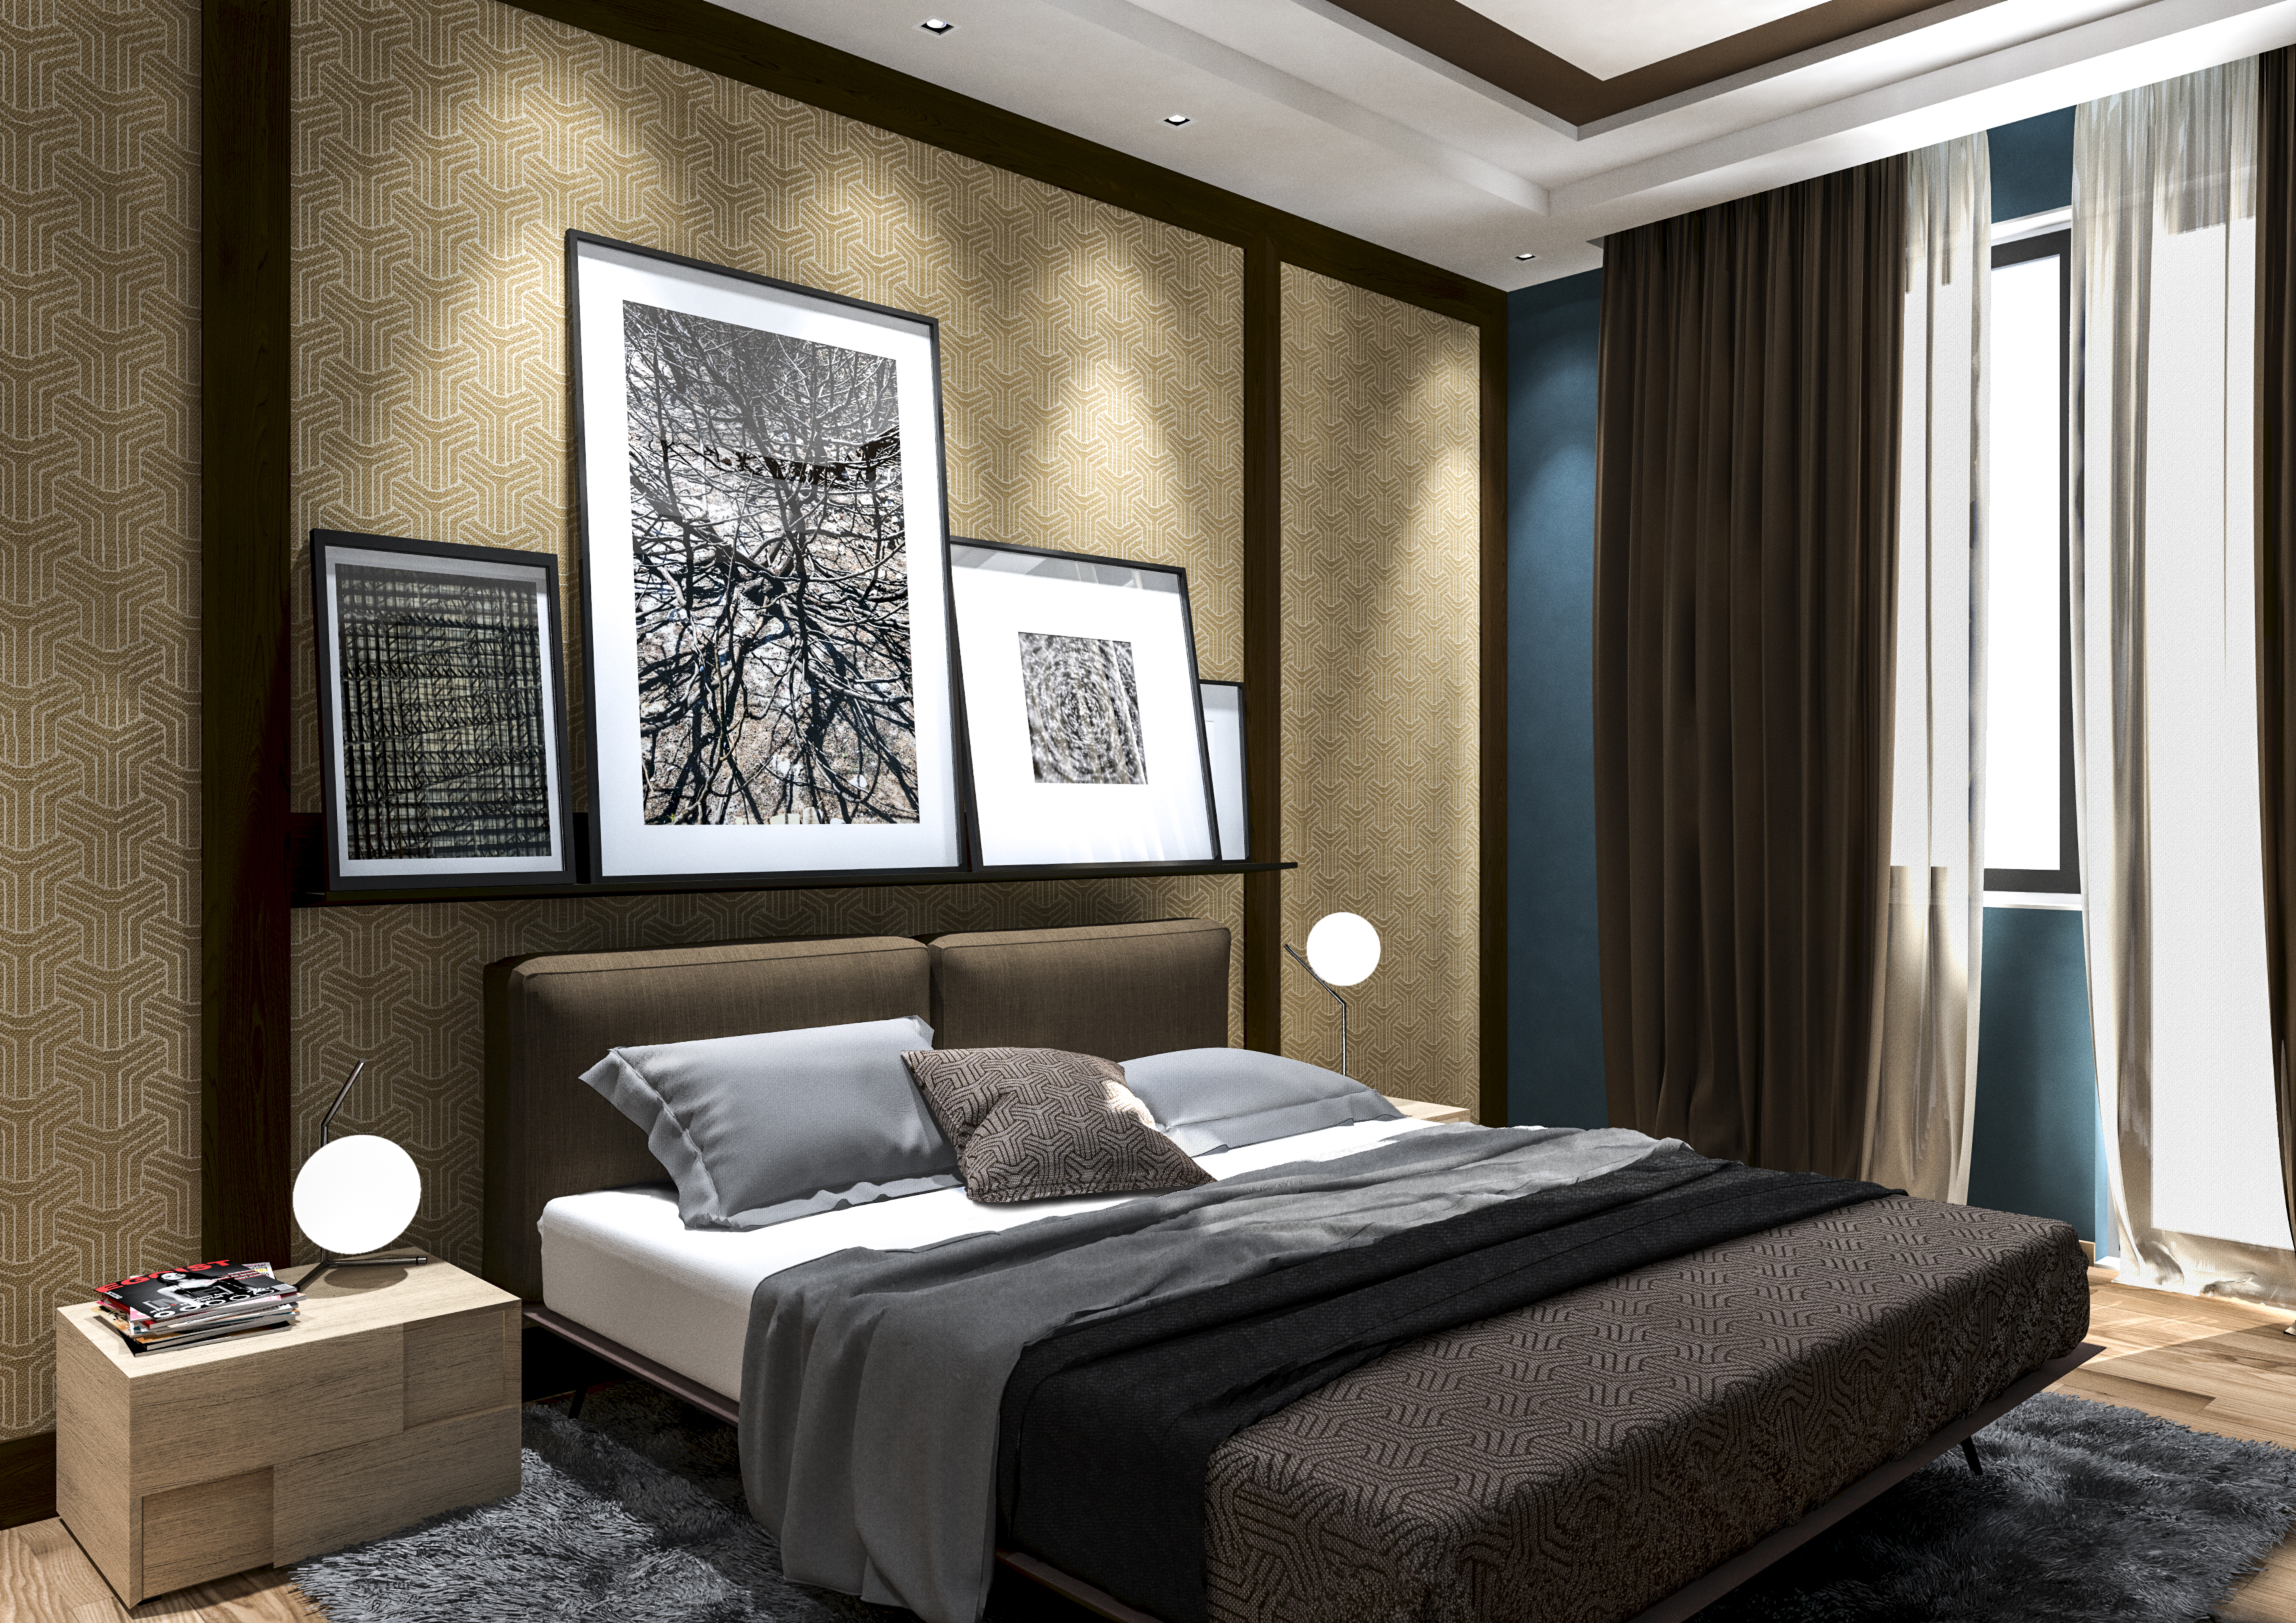 Hotel Suite - Visual solutions by VISUALAND.it